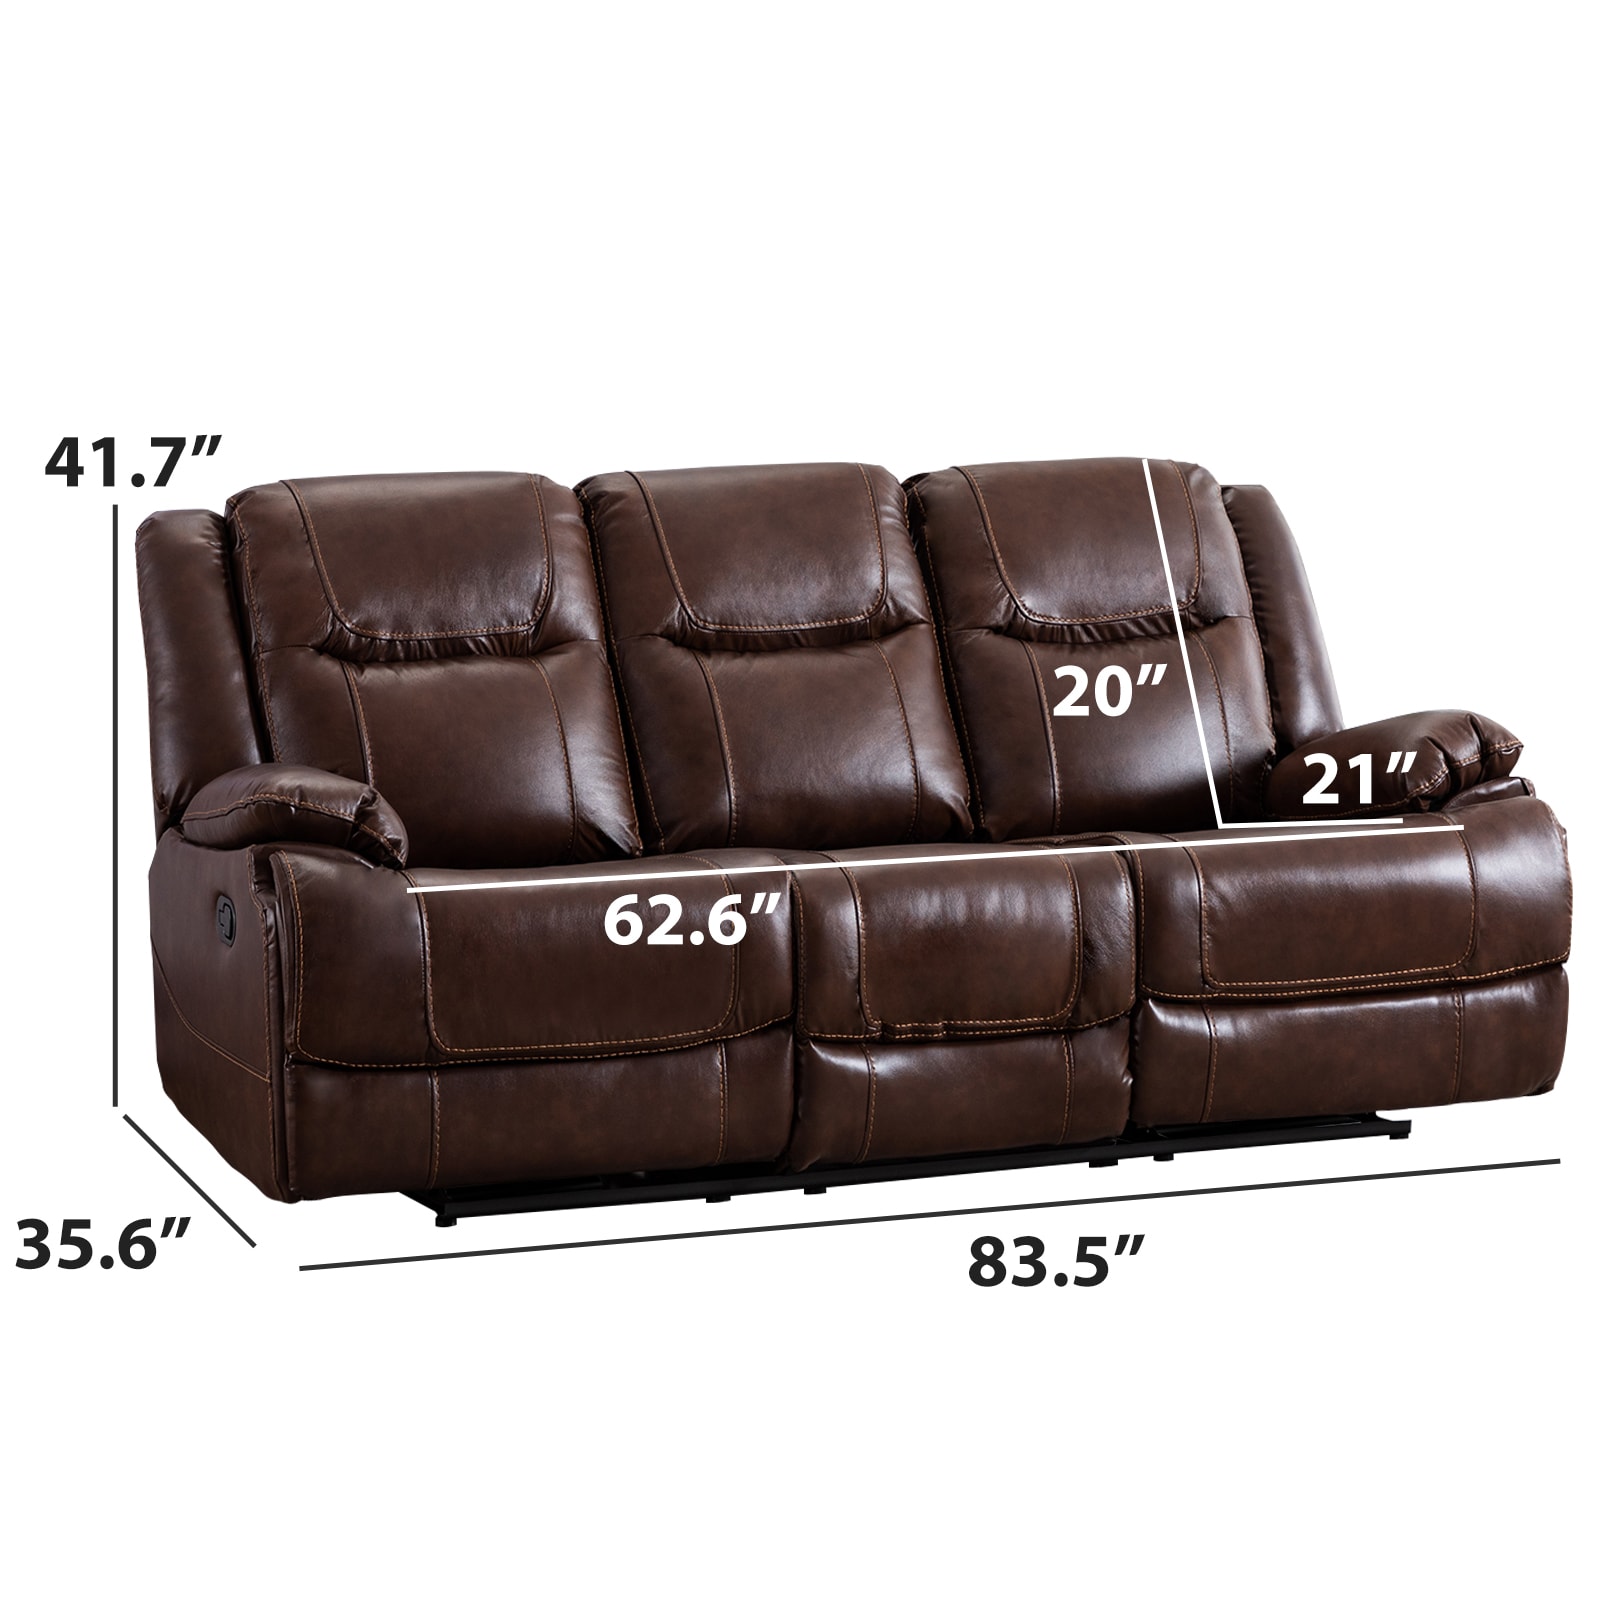 Local Leather Couch Repair for Burlington and Surrounding Areas